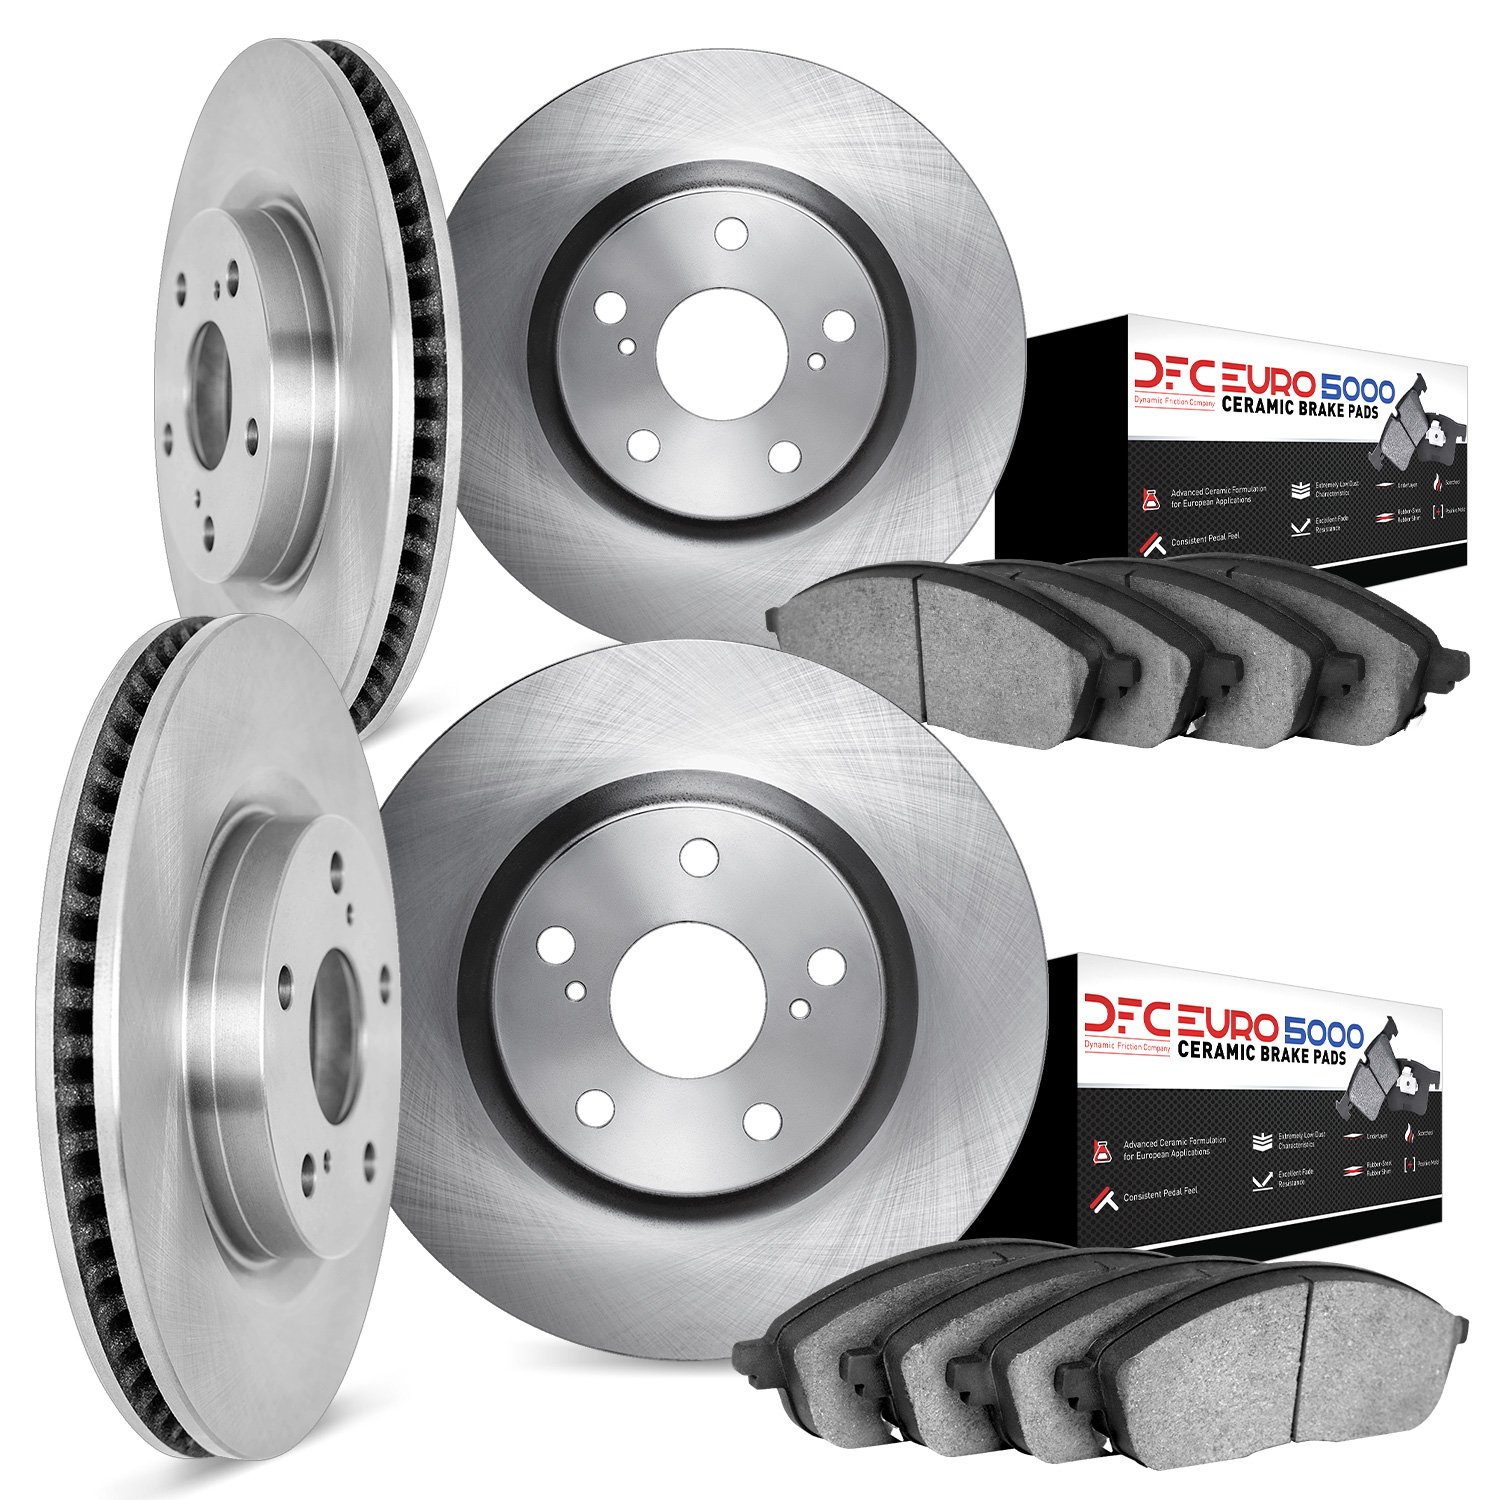 6604-20009 Brake Rotors w/5000 Euro Ceramic Brake Pads, 2017-2019 Multiple Makes/Models, Position: Front and Rear